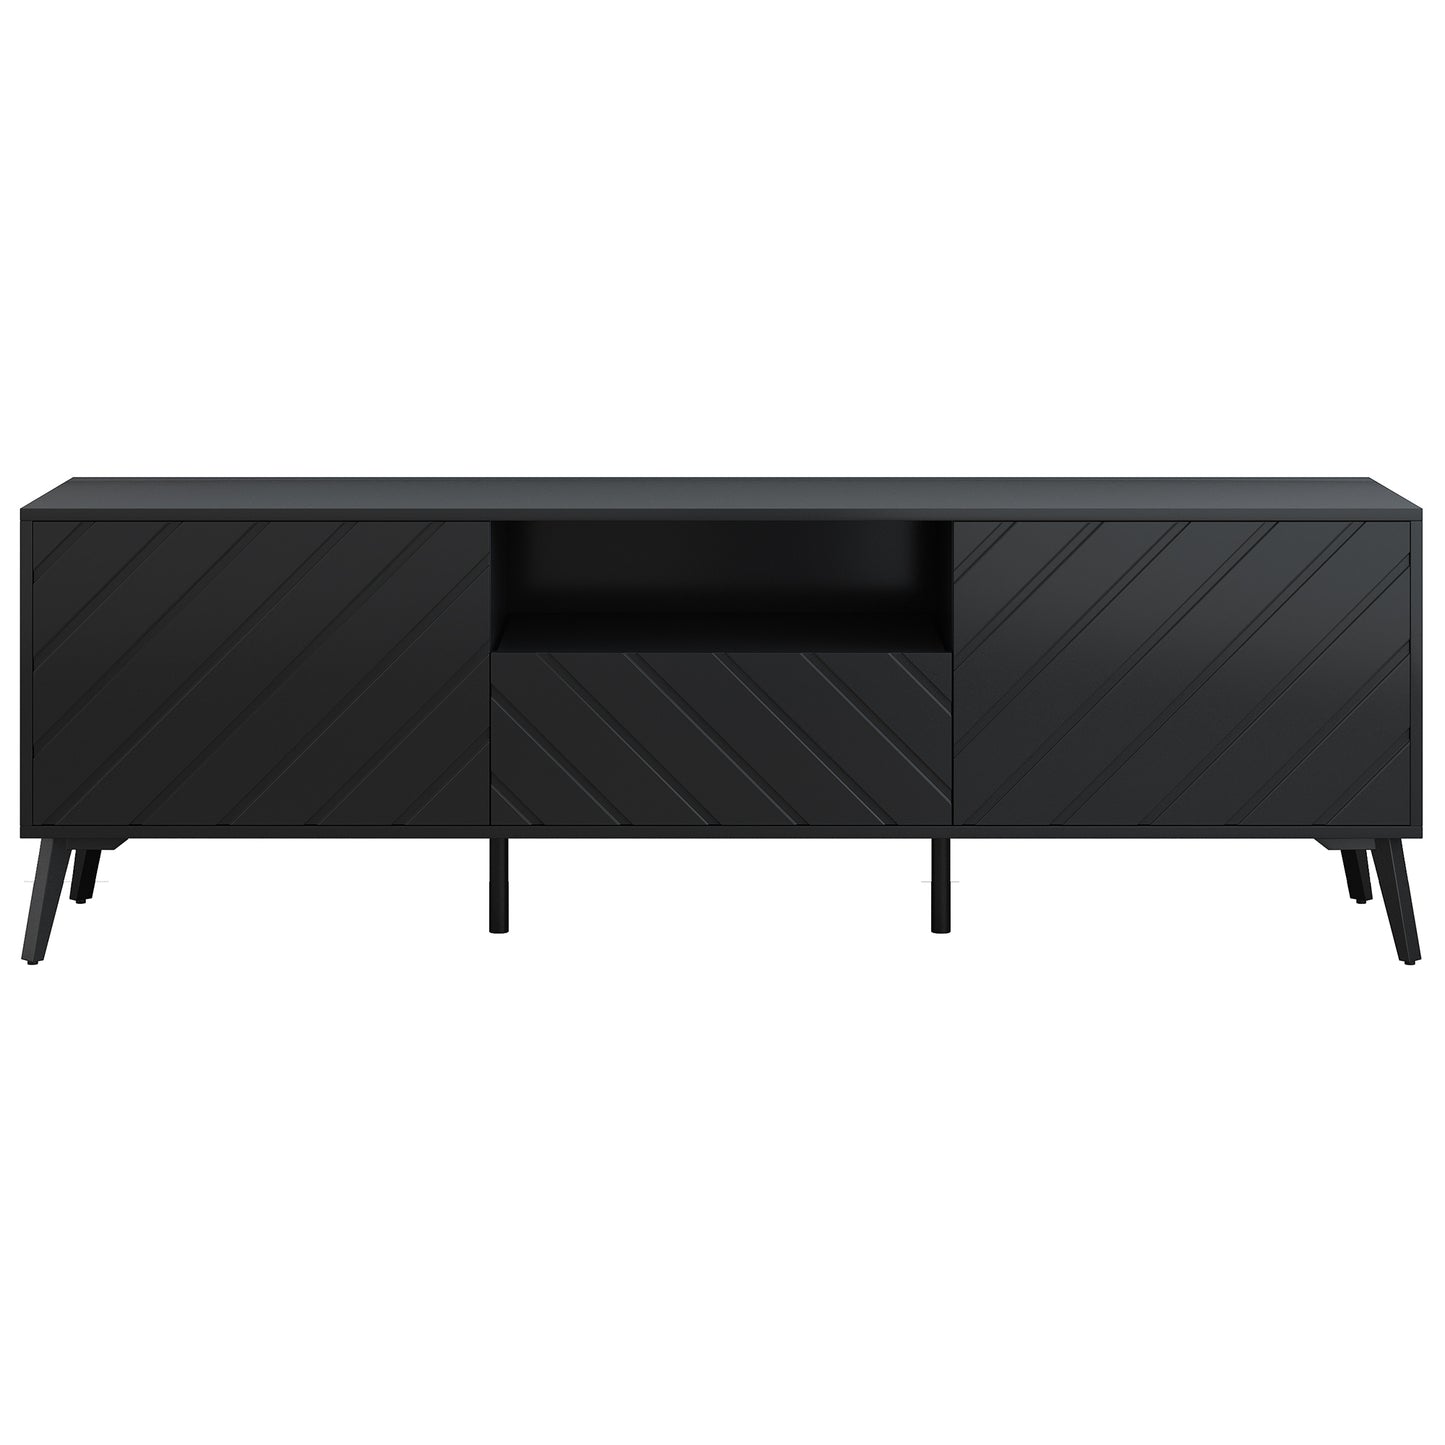 Timber Stand for 70 inch TV in Black Finish